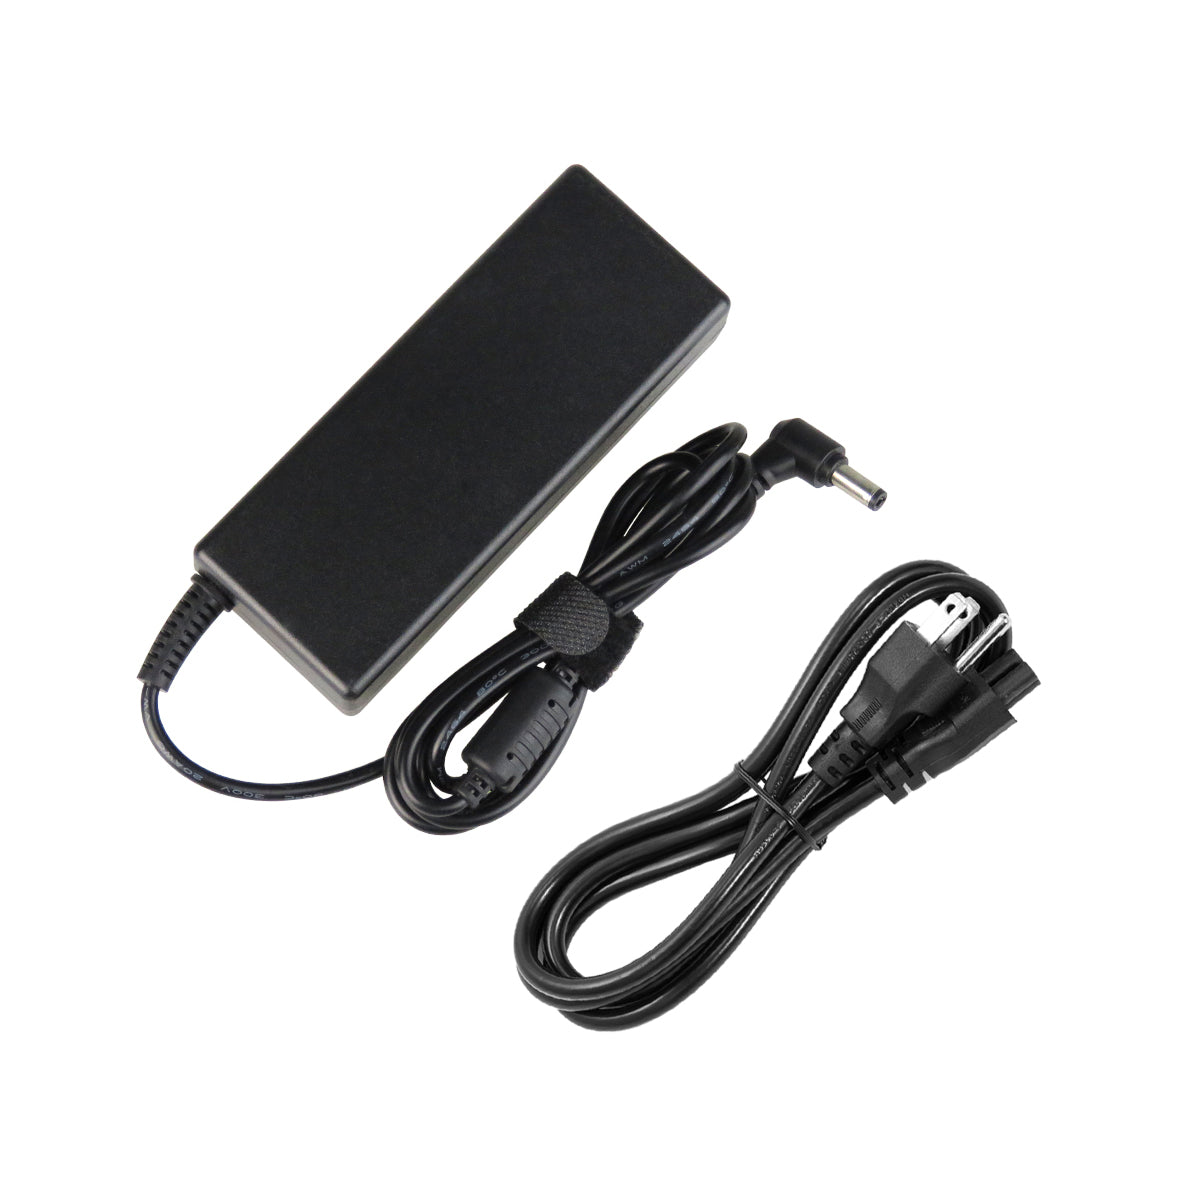 AC Adapter Charger for Gateway 8550 Notebook.